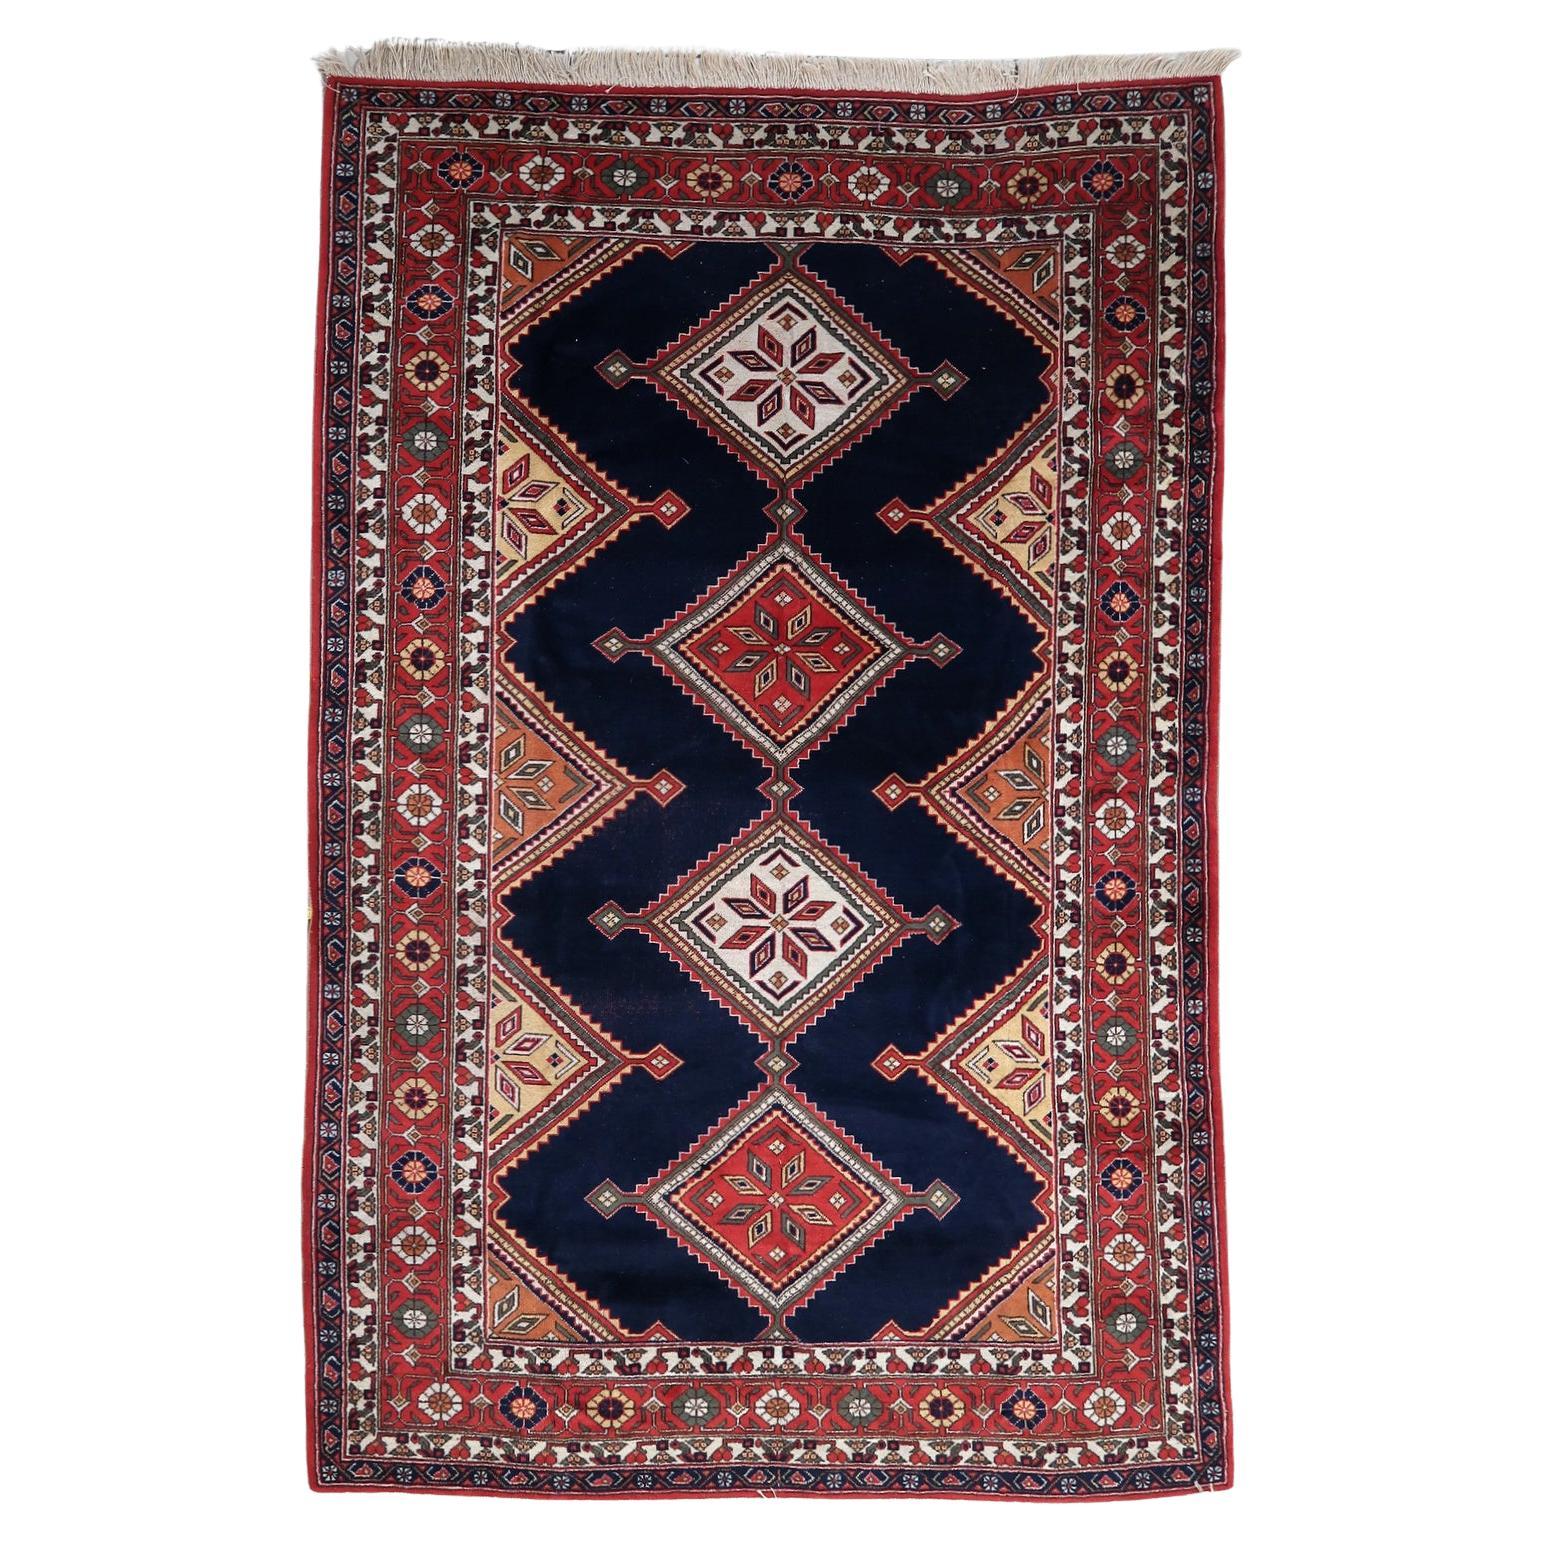 Handmade Vintage Persian Style Afshar Rug 6.4' x 9.9', 1950s - 1C1116 For Sale